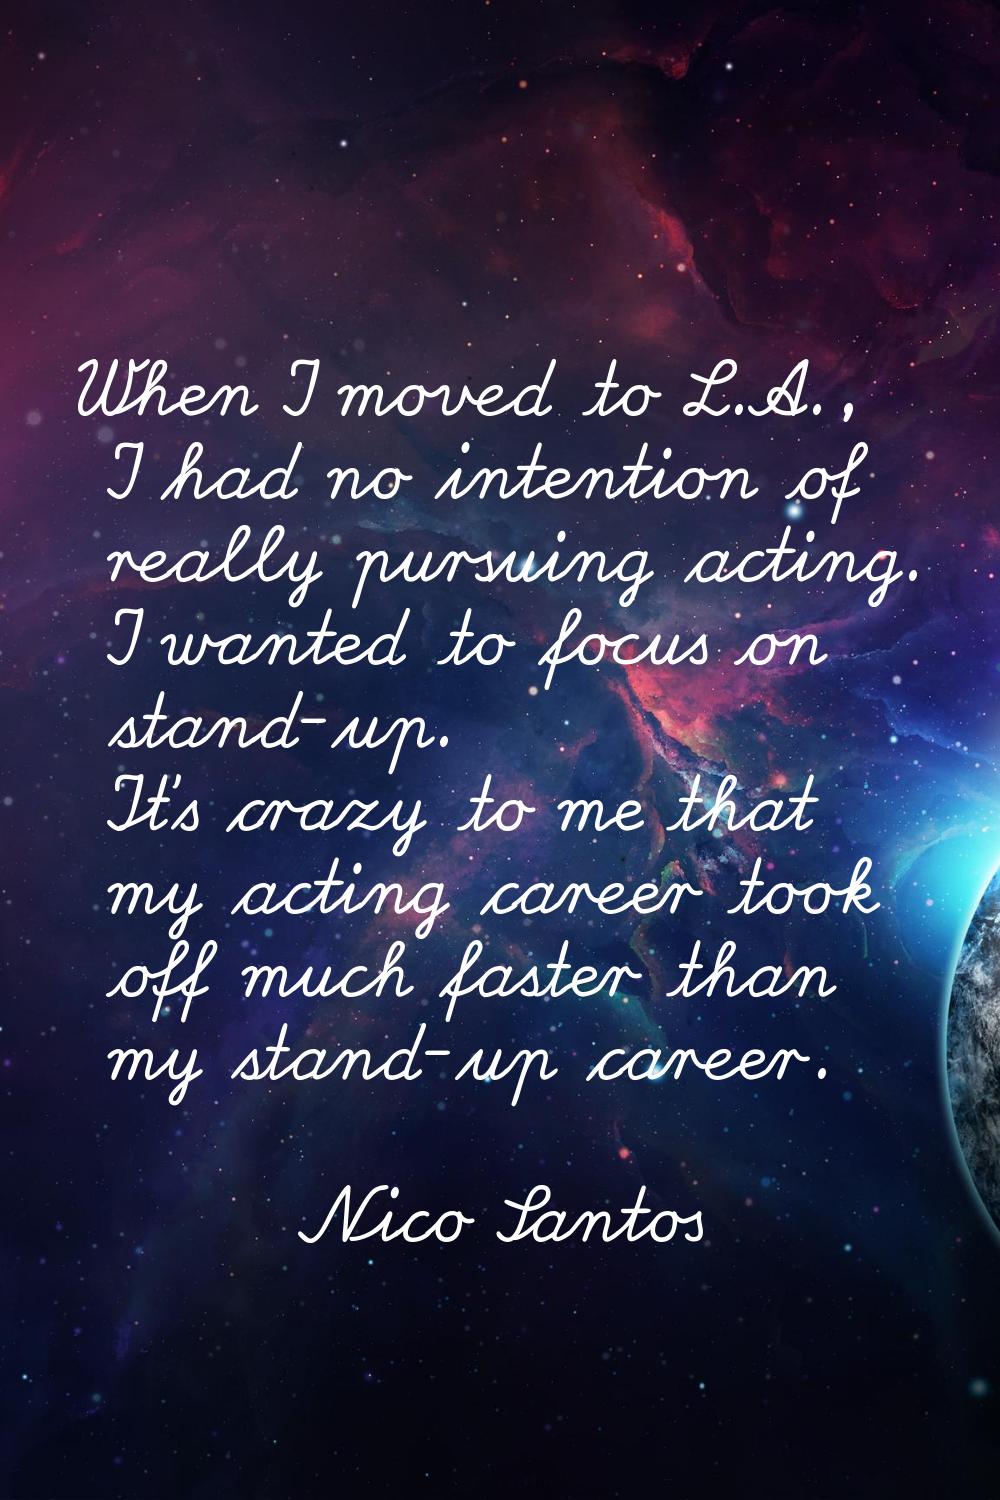 When I moved to L.A., I had no intention of really pursuing acting. I wanted to focus on stand-up. 